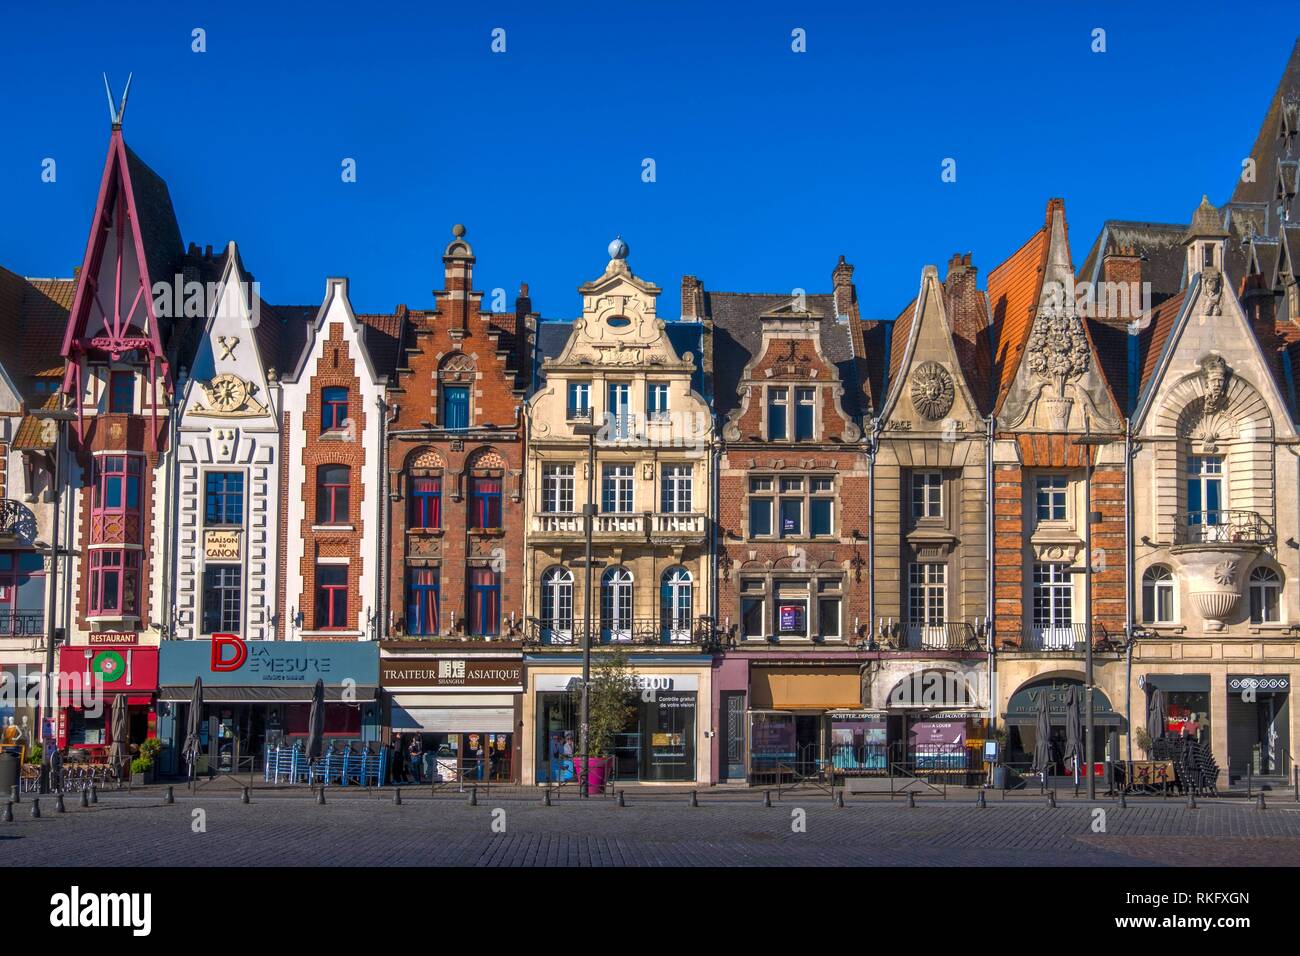 France, Hauts de France, Pas de Calais, Bethune. Béthune is a town rich in architectural heritage and history. It has, among other features, a large Stock Photo